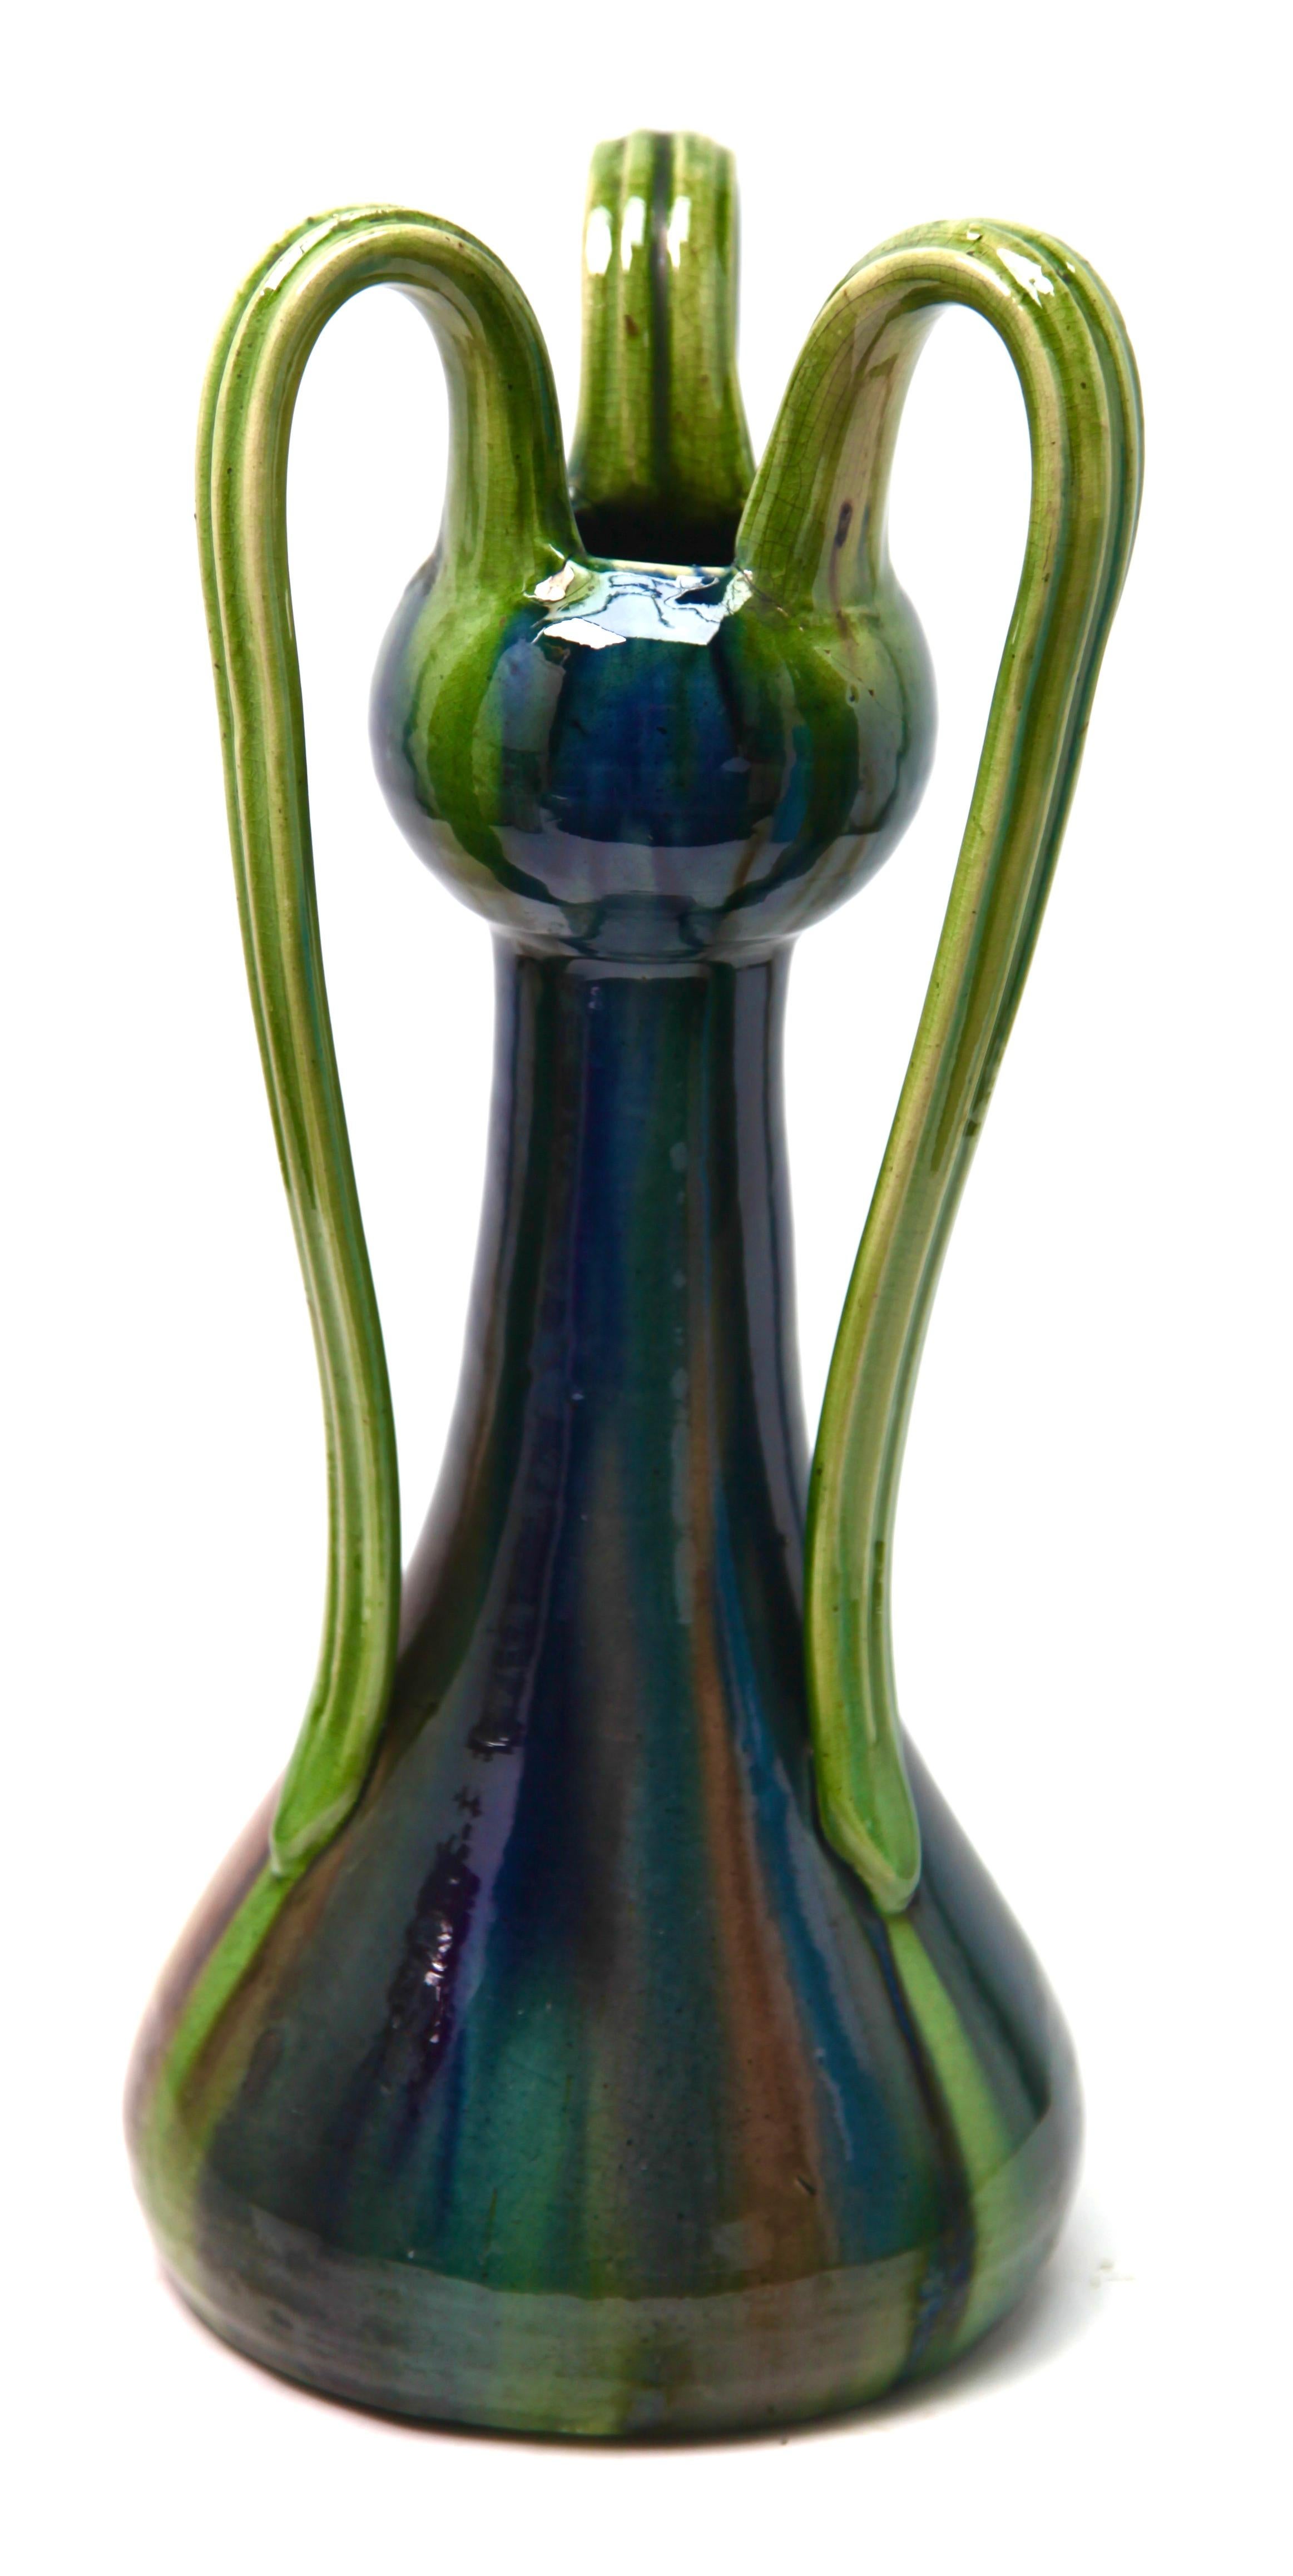 Glazed Art Nouveau Vase with 3 Handles with Controlled Drip Glazes in Blue and Green For Sale